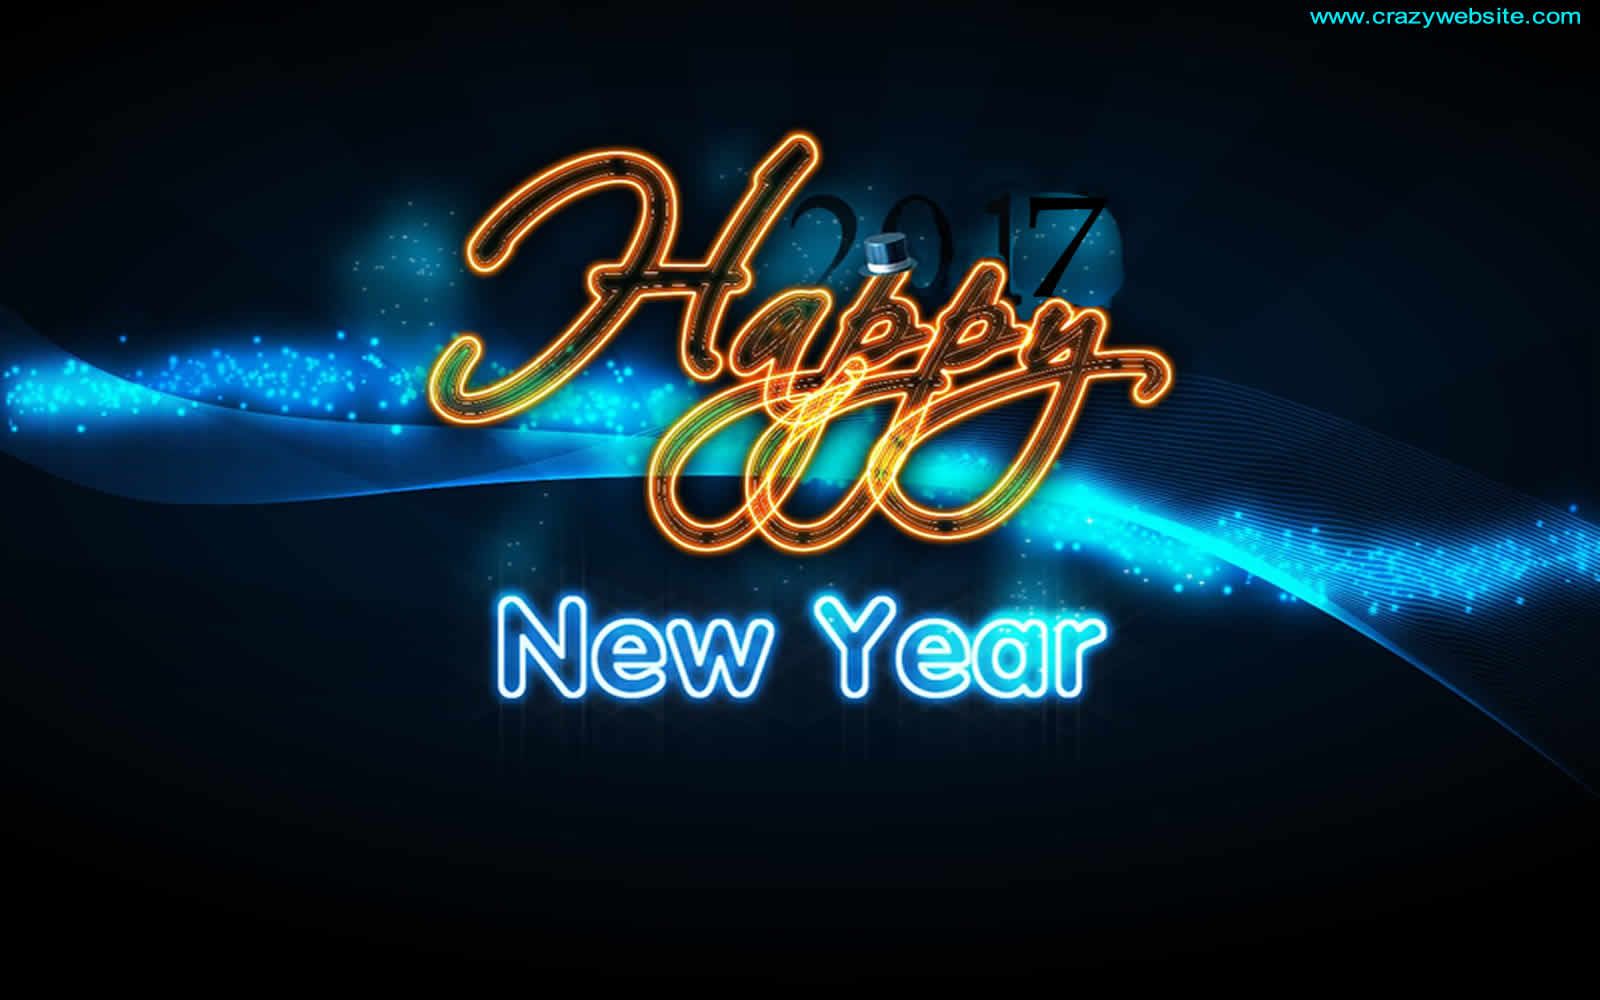 Wallpaper Background Free New Year 2016 / 2017 Graphic New Year Flashing Lights Wallpaper & Background Download